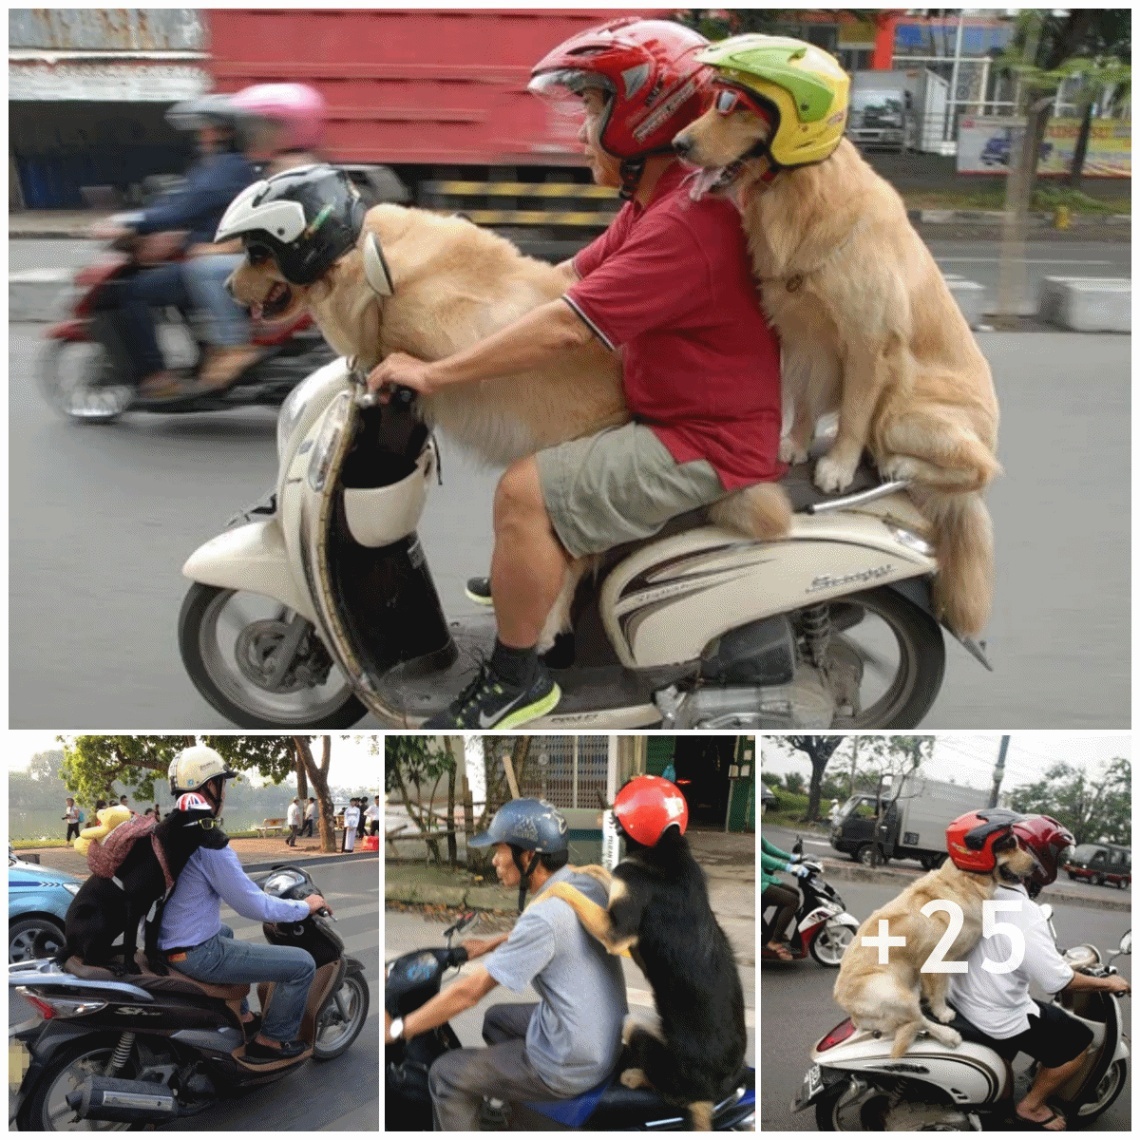 “Funny images of adorable dogs wearing helmets and riding motorbikes are taking the Internet by storm!”